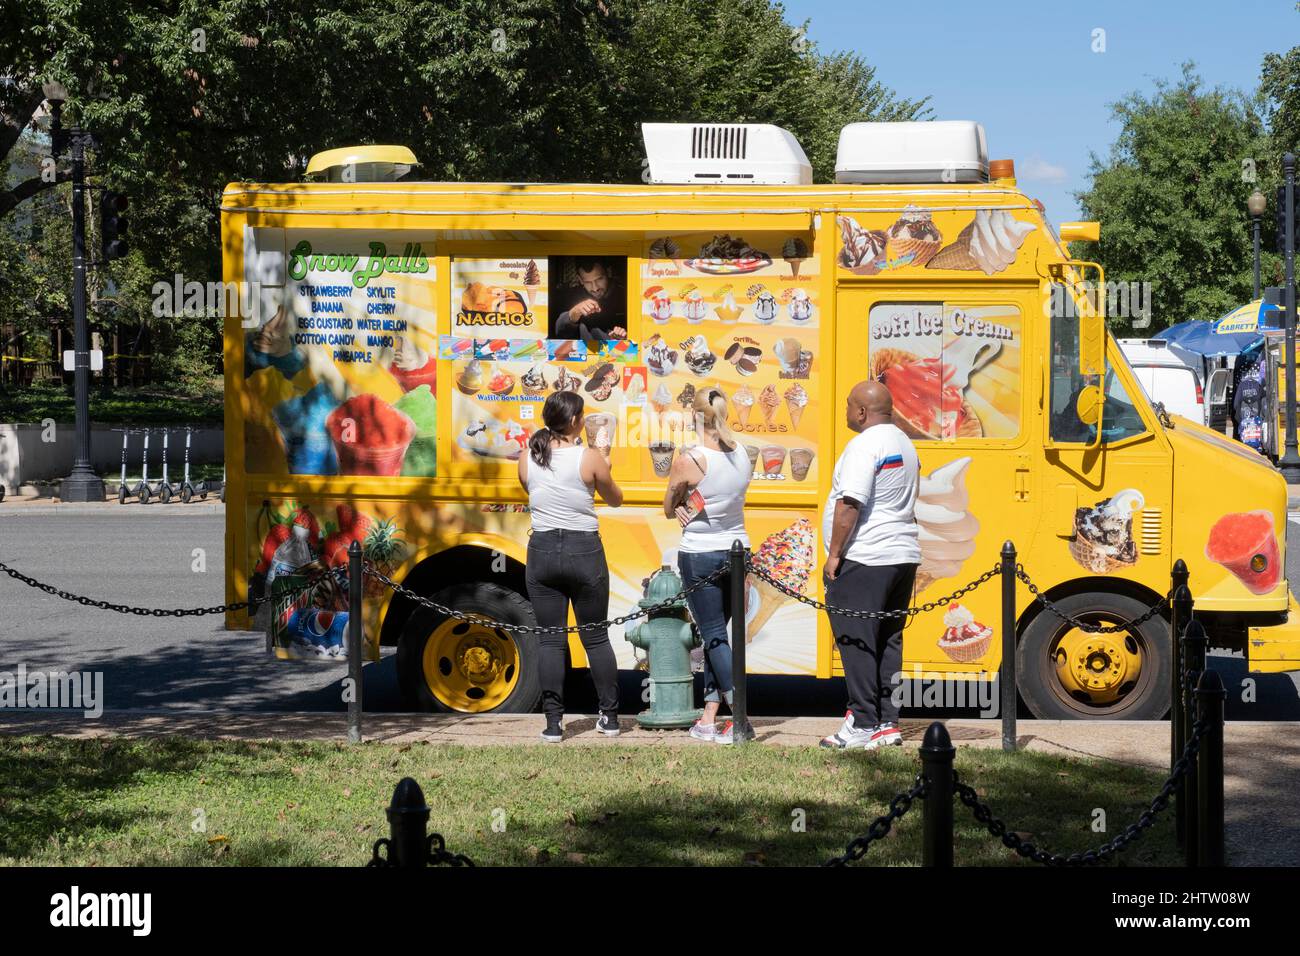 Washington, DC. Customers at a Food Truck on Constitution Avenue. Stock Photo